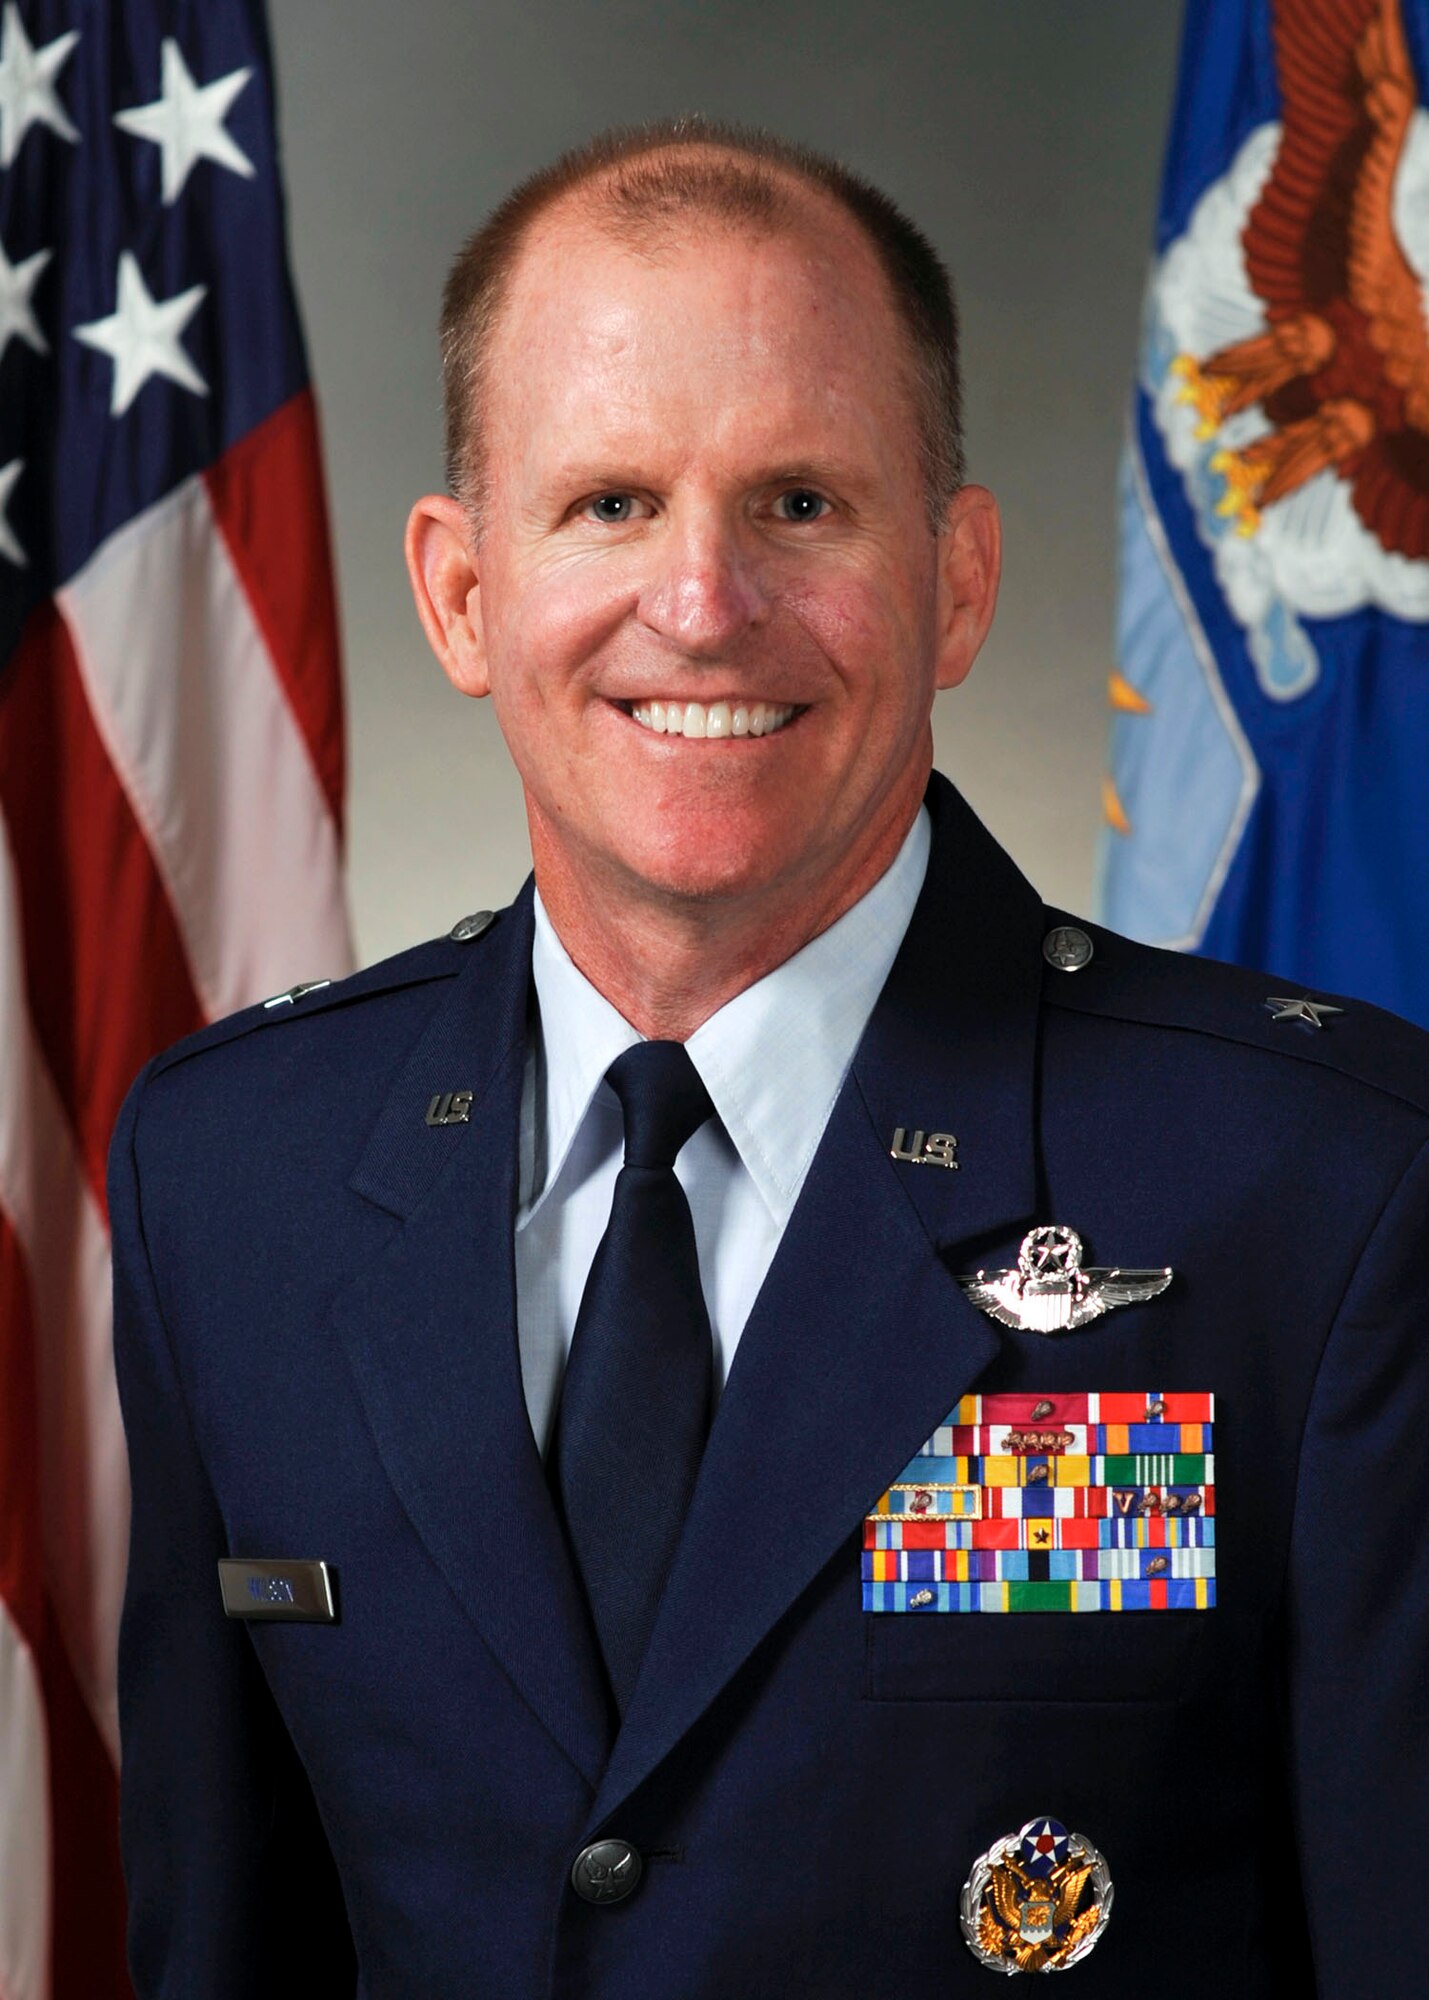 BARKSDALE AIR FORCE BASE, La. - Brig. Gen. Steve Wilson will assume command of the Eighth Air Force (Air Forces Strategic) during a change-of-command ceremony June 3 at Hoban Hall on Barksdale Air Force Base. (Courtesy photo)